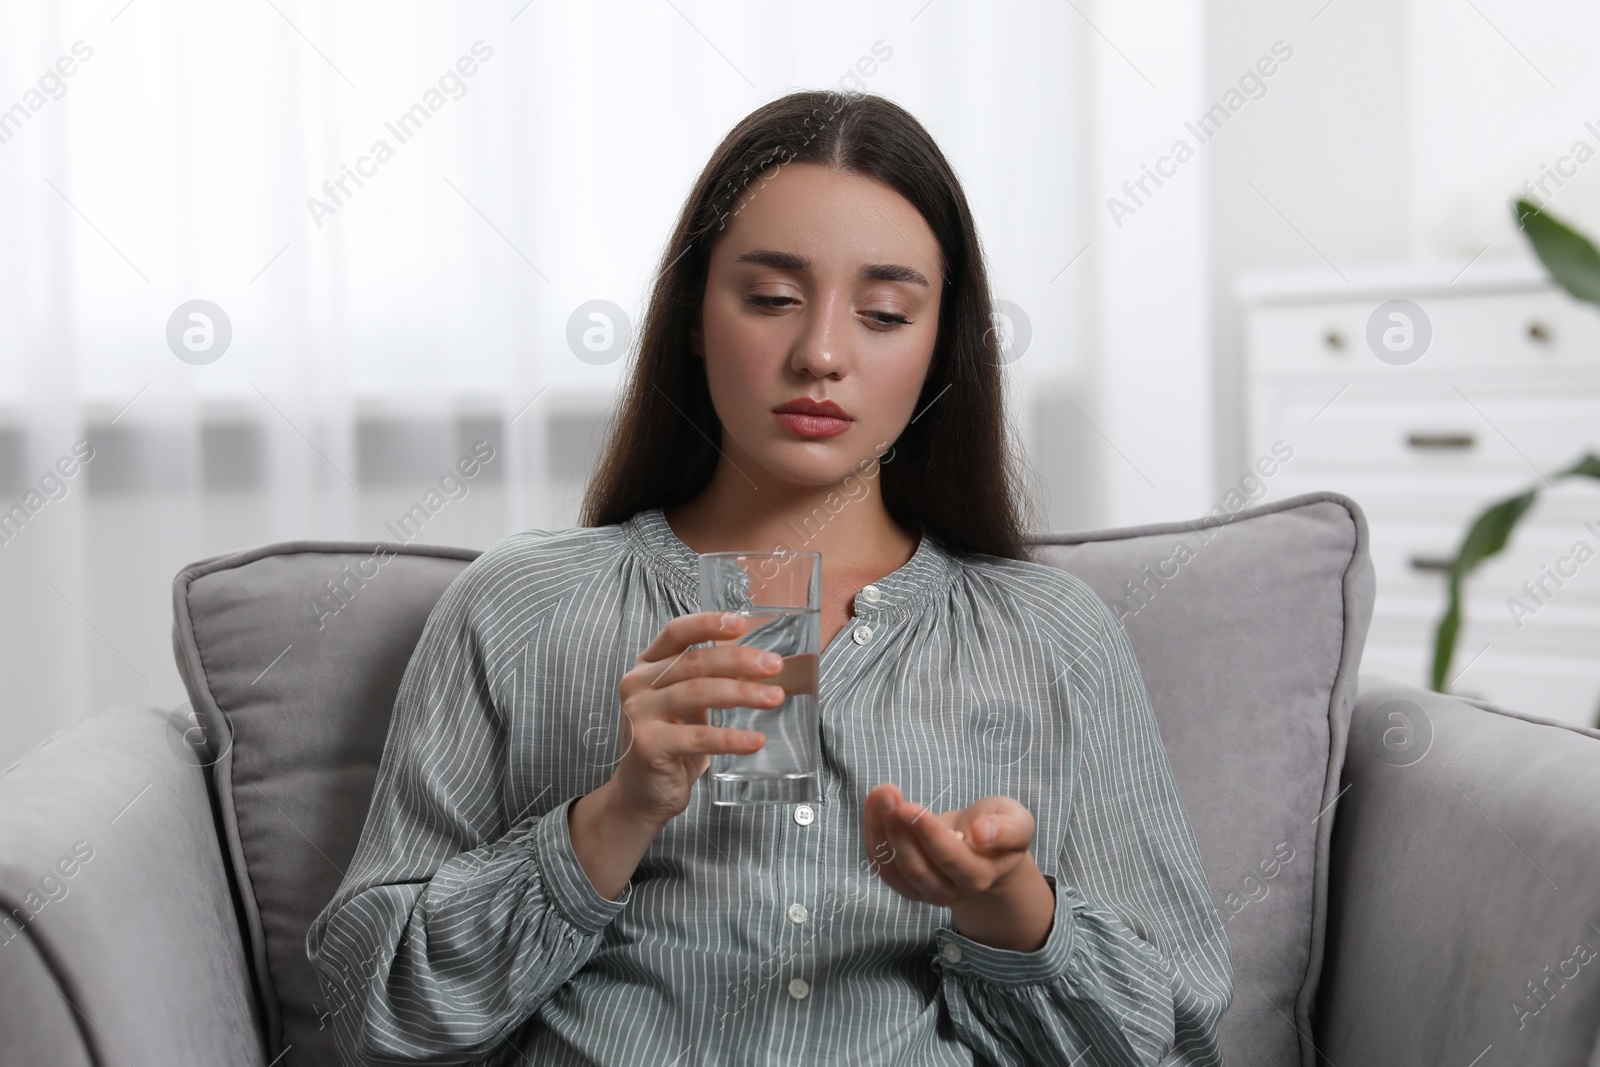 Photo of Depressed woman with glass of water taking antidepressant pills in armchair indoors